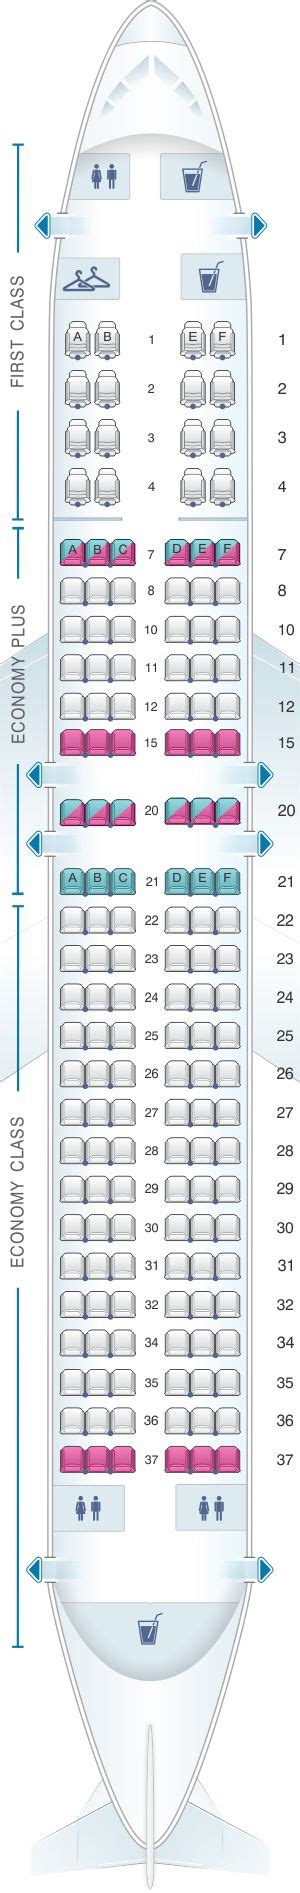 Boeing Seating Chart United